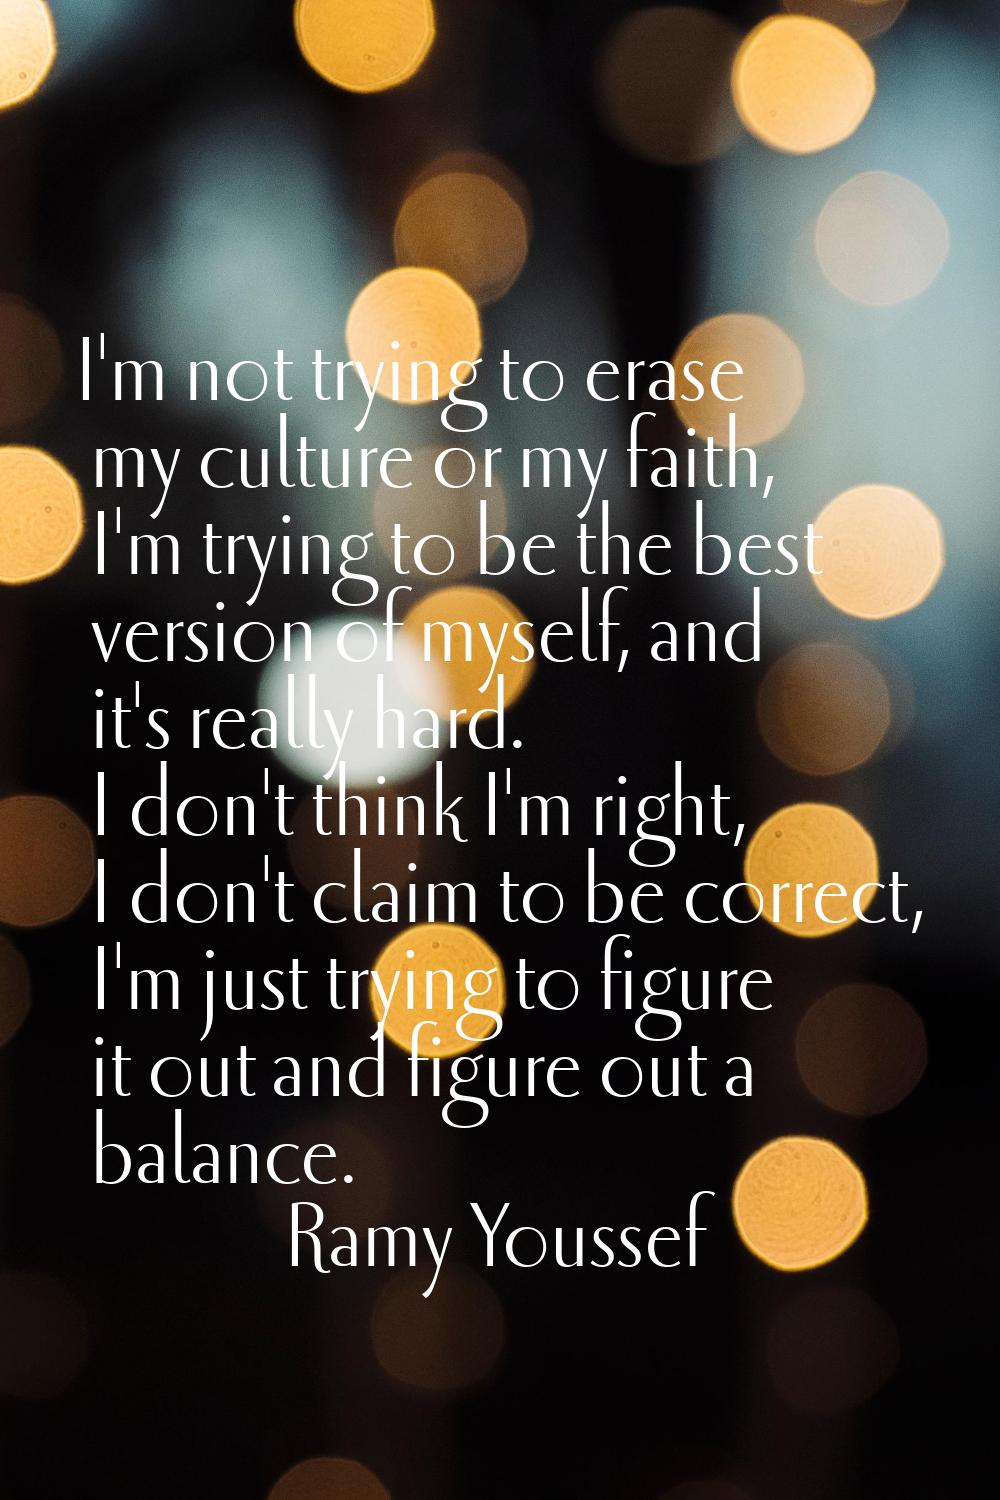 I'm not trying to erase my culture or my faith, I'm trying to be the best version of myself, and it